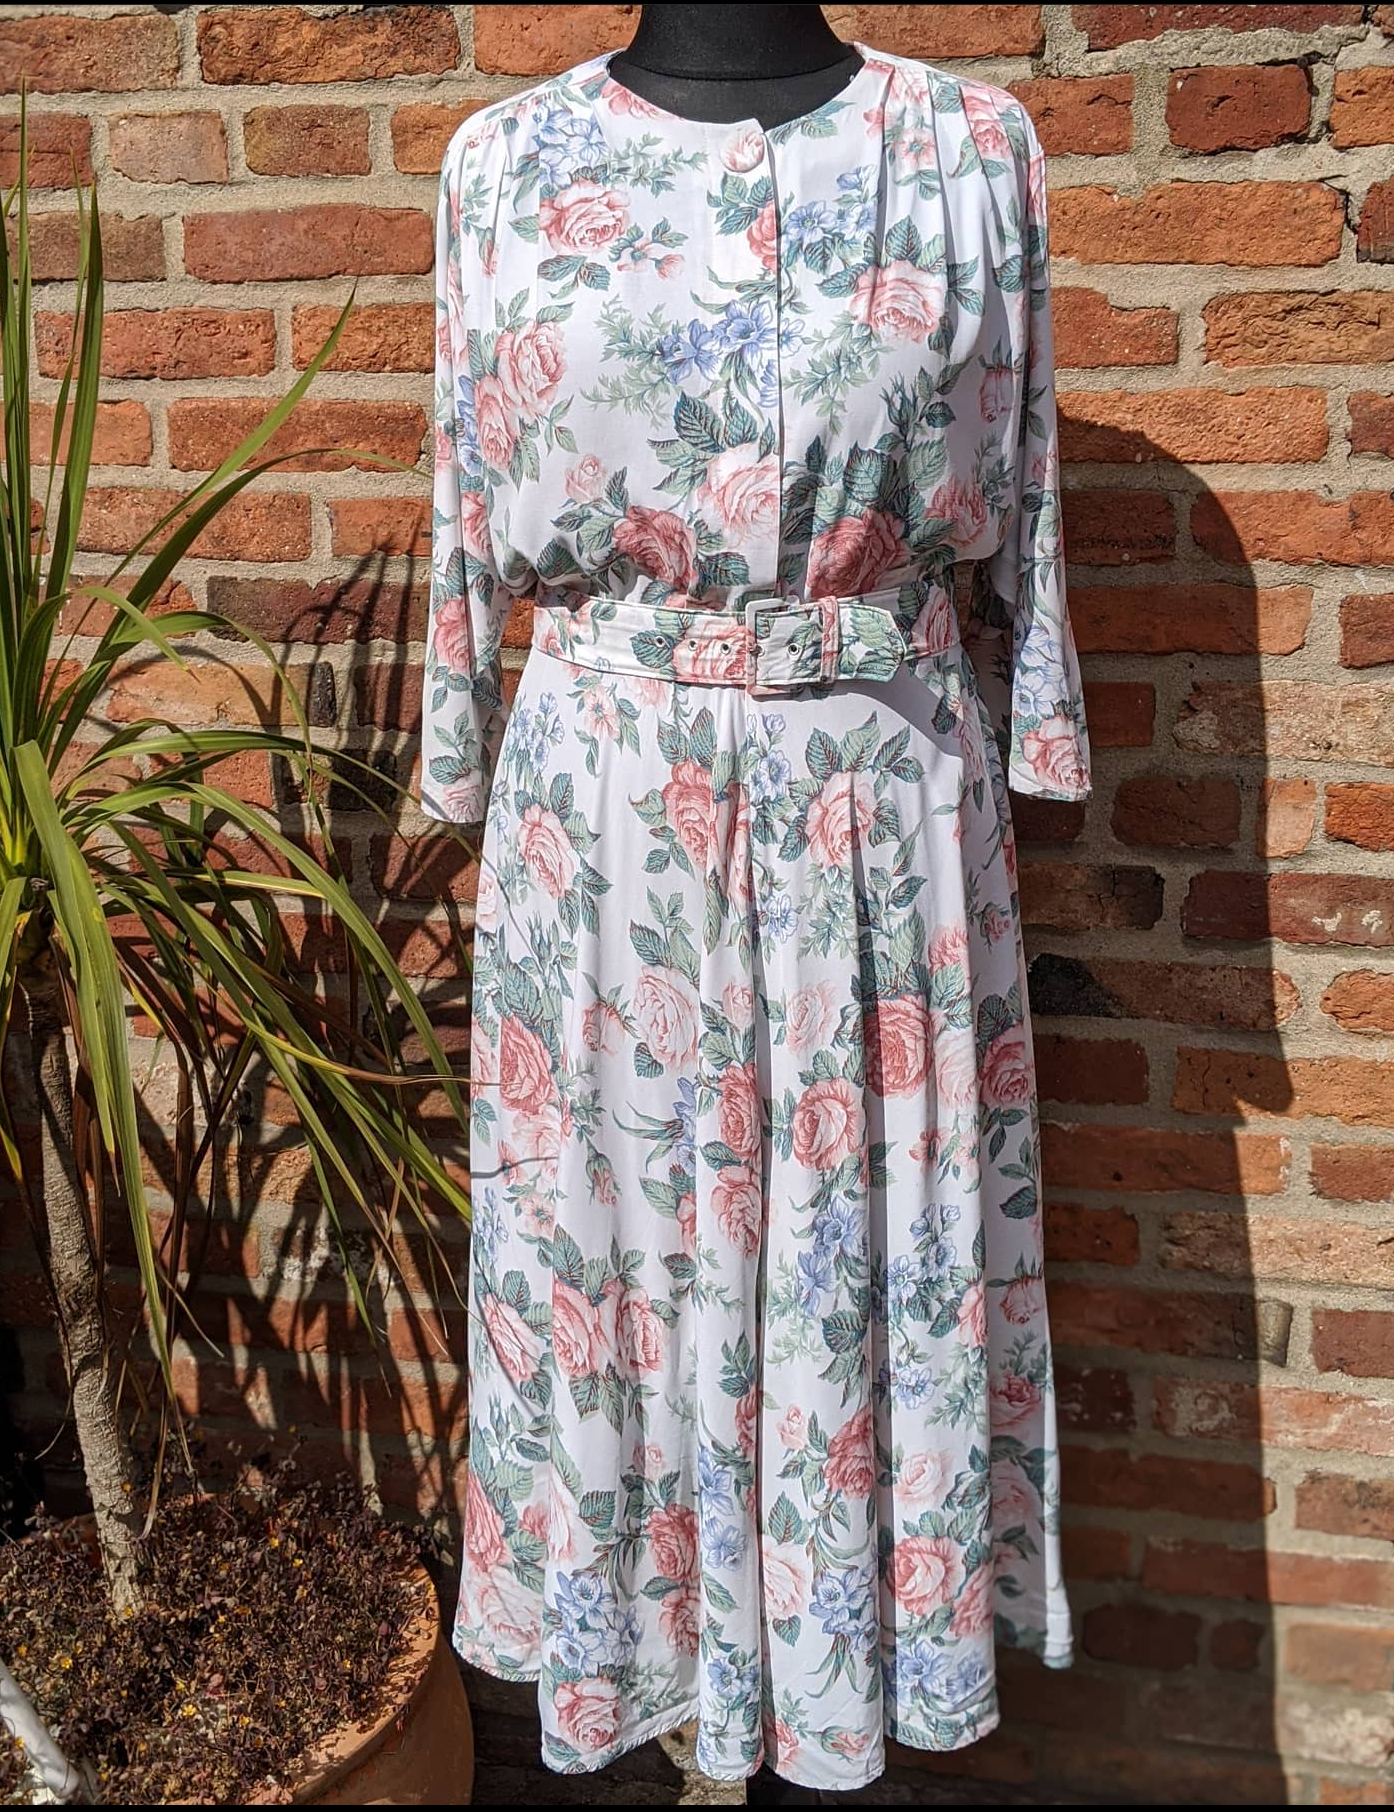 Gorgeous classic floral print Betsy's Things midi dress size 16